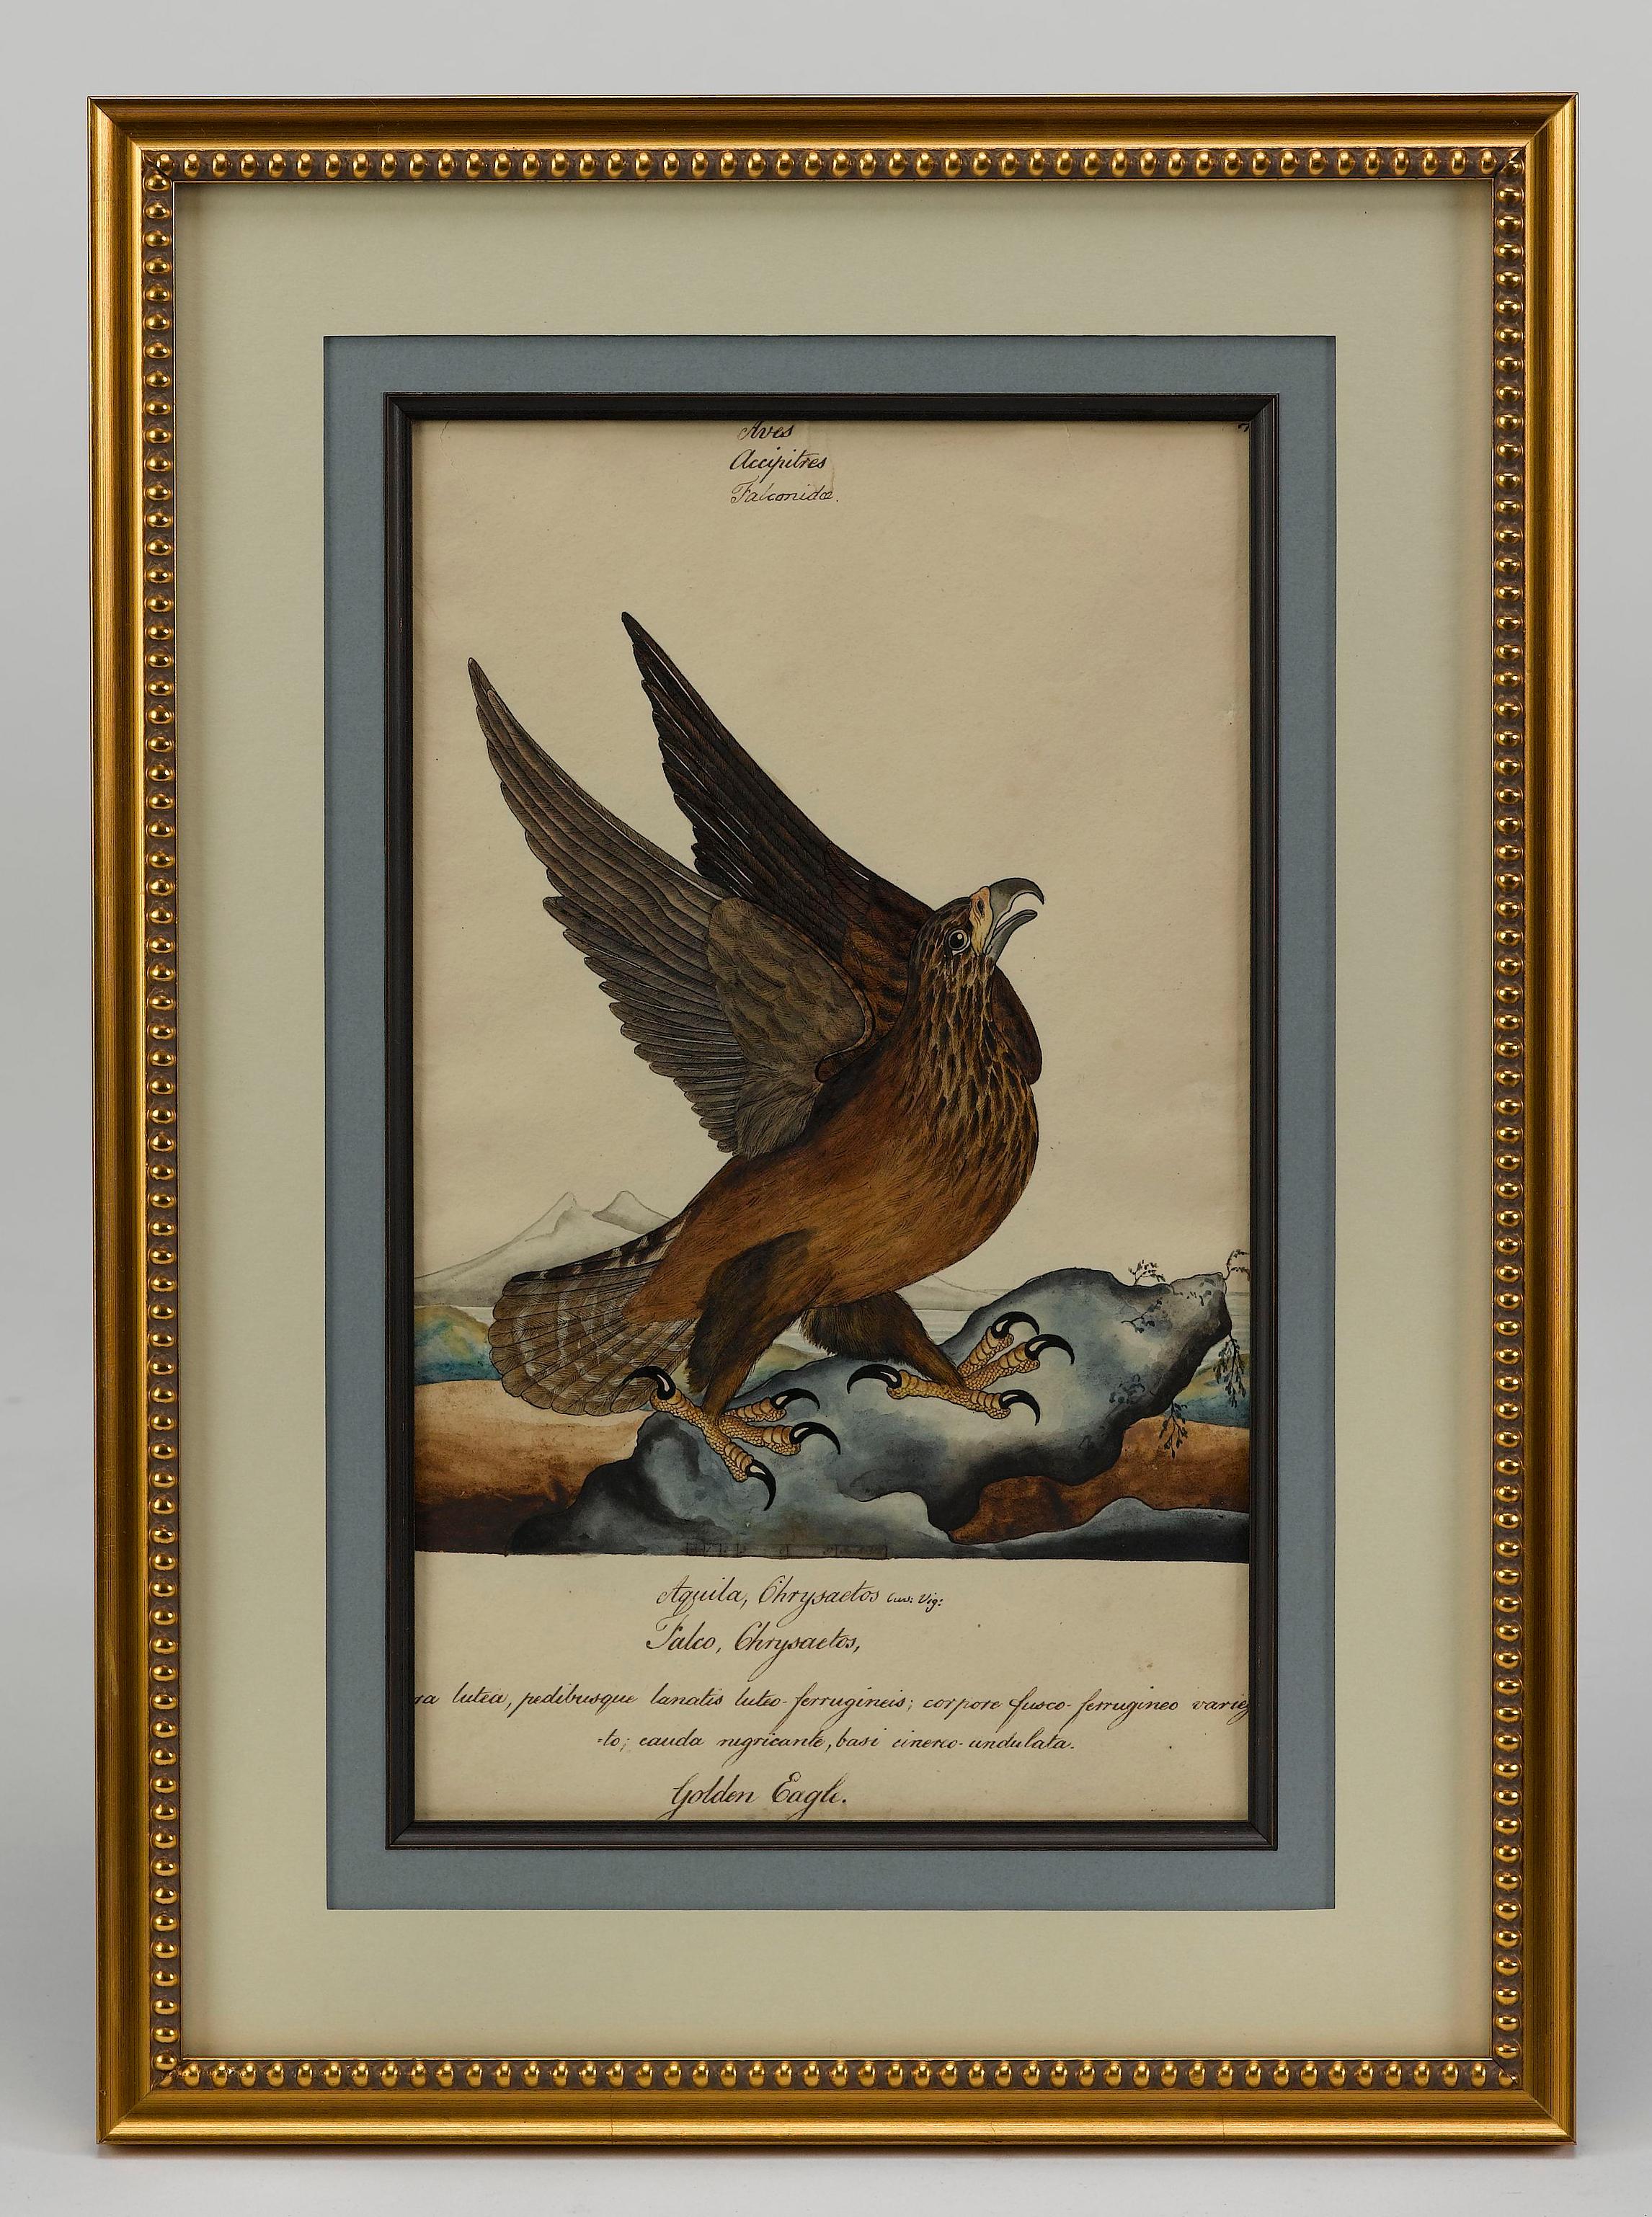 Presented is a stunning original painting of a Golden Eagle by British natural history artist William Goodall. A beautiful and colorful combination of both watercolor and ink, this painting is rendered in a detailed, finished style. The eagle is